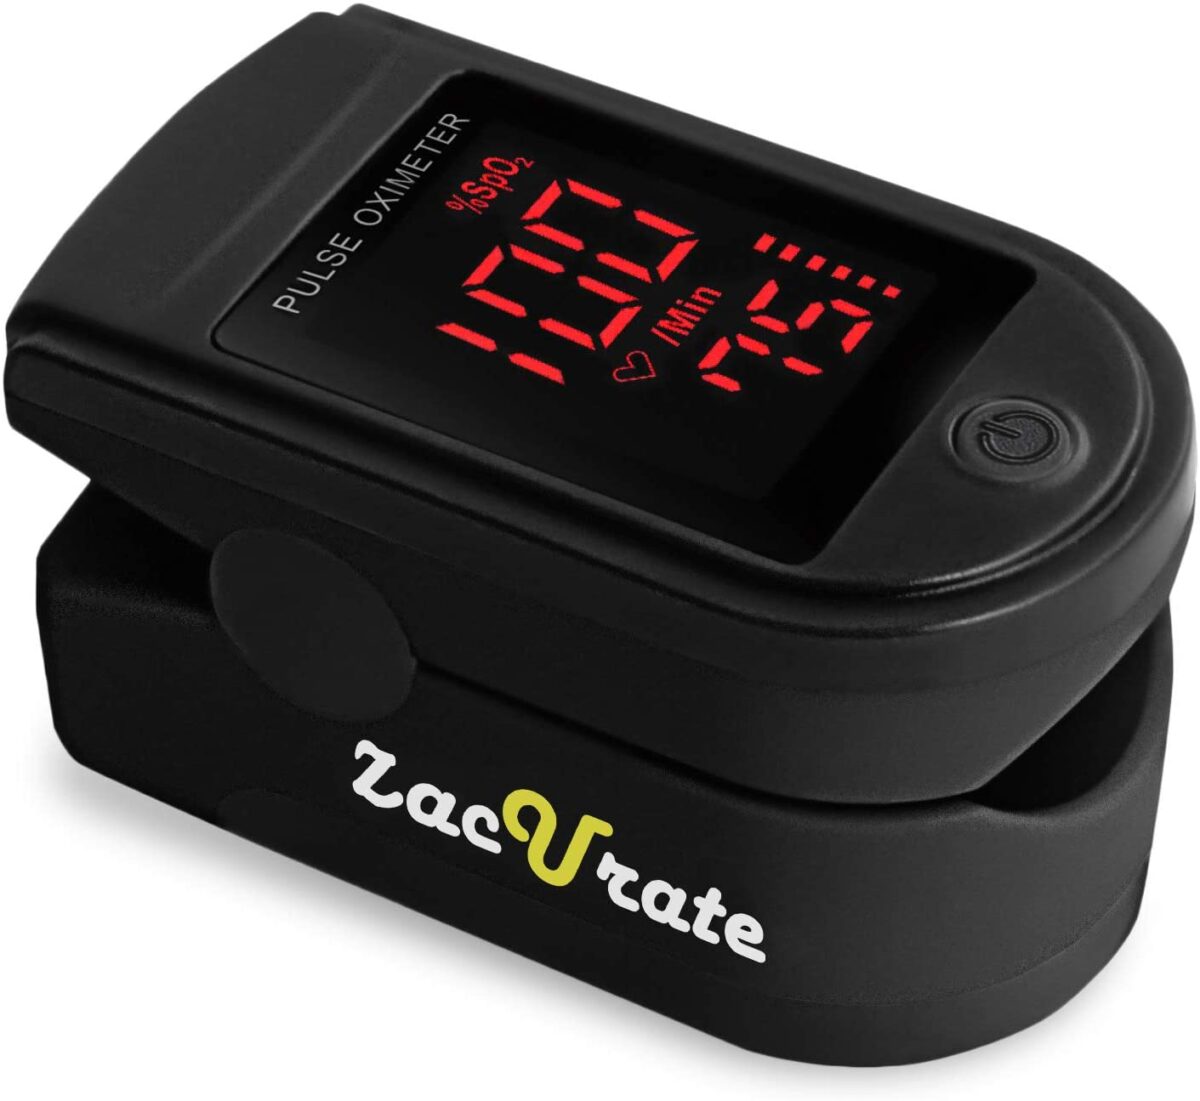 Zacurate Pro Series 500DL Fingertip Pulse Oximeter Blood Oxygen Saturation Monitor 3